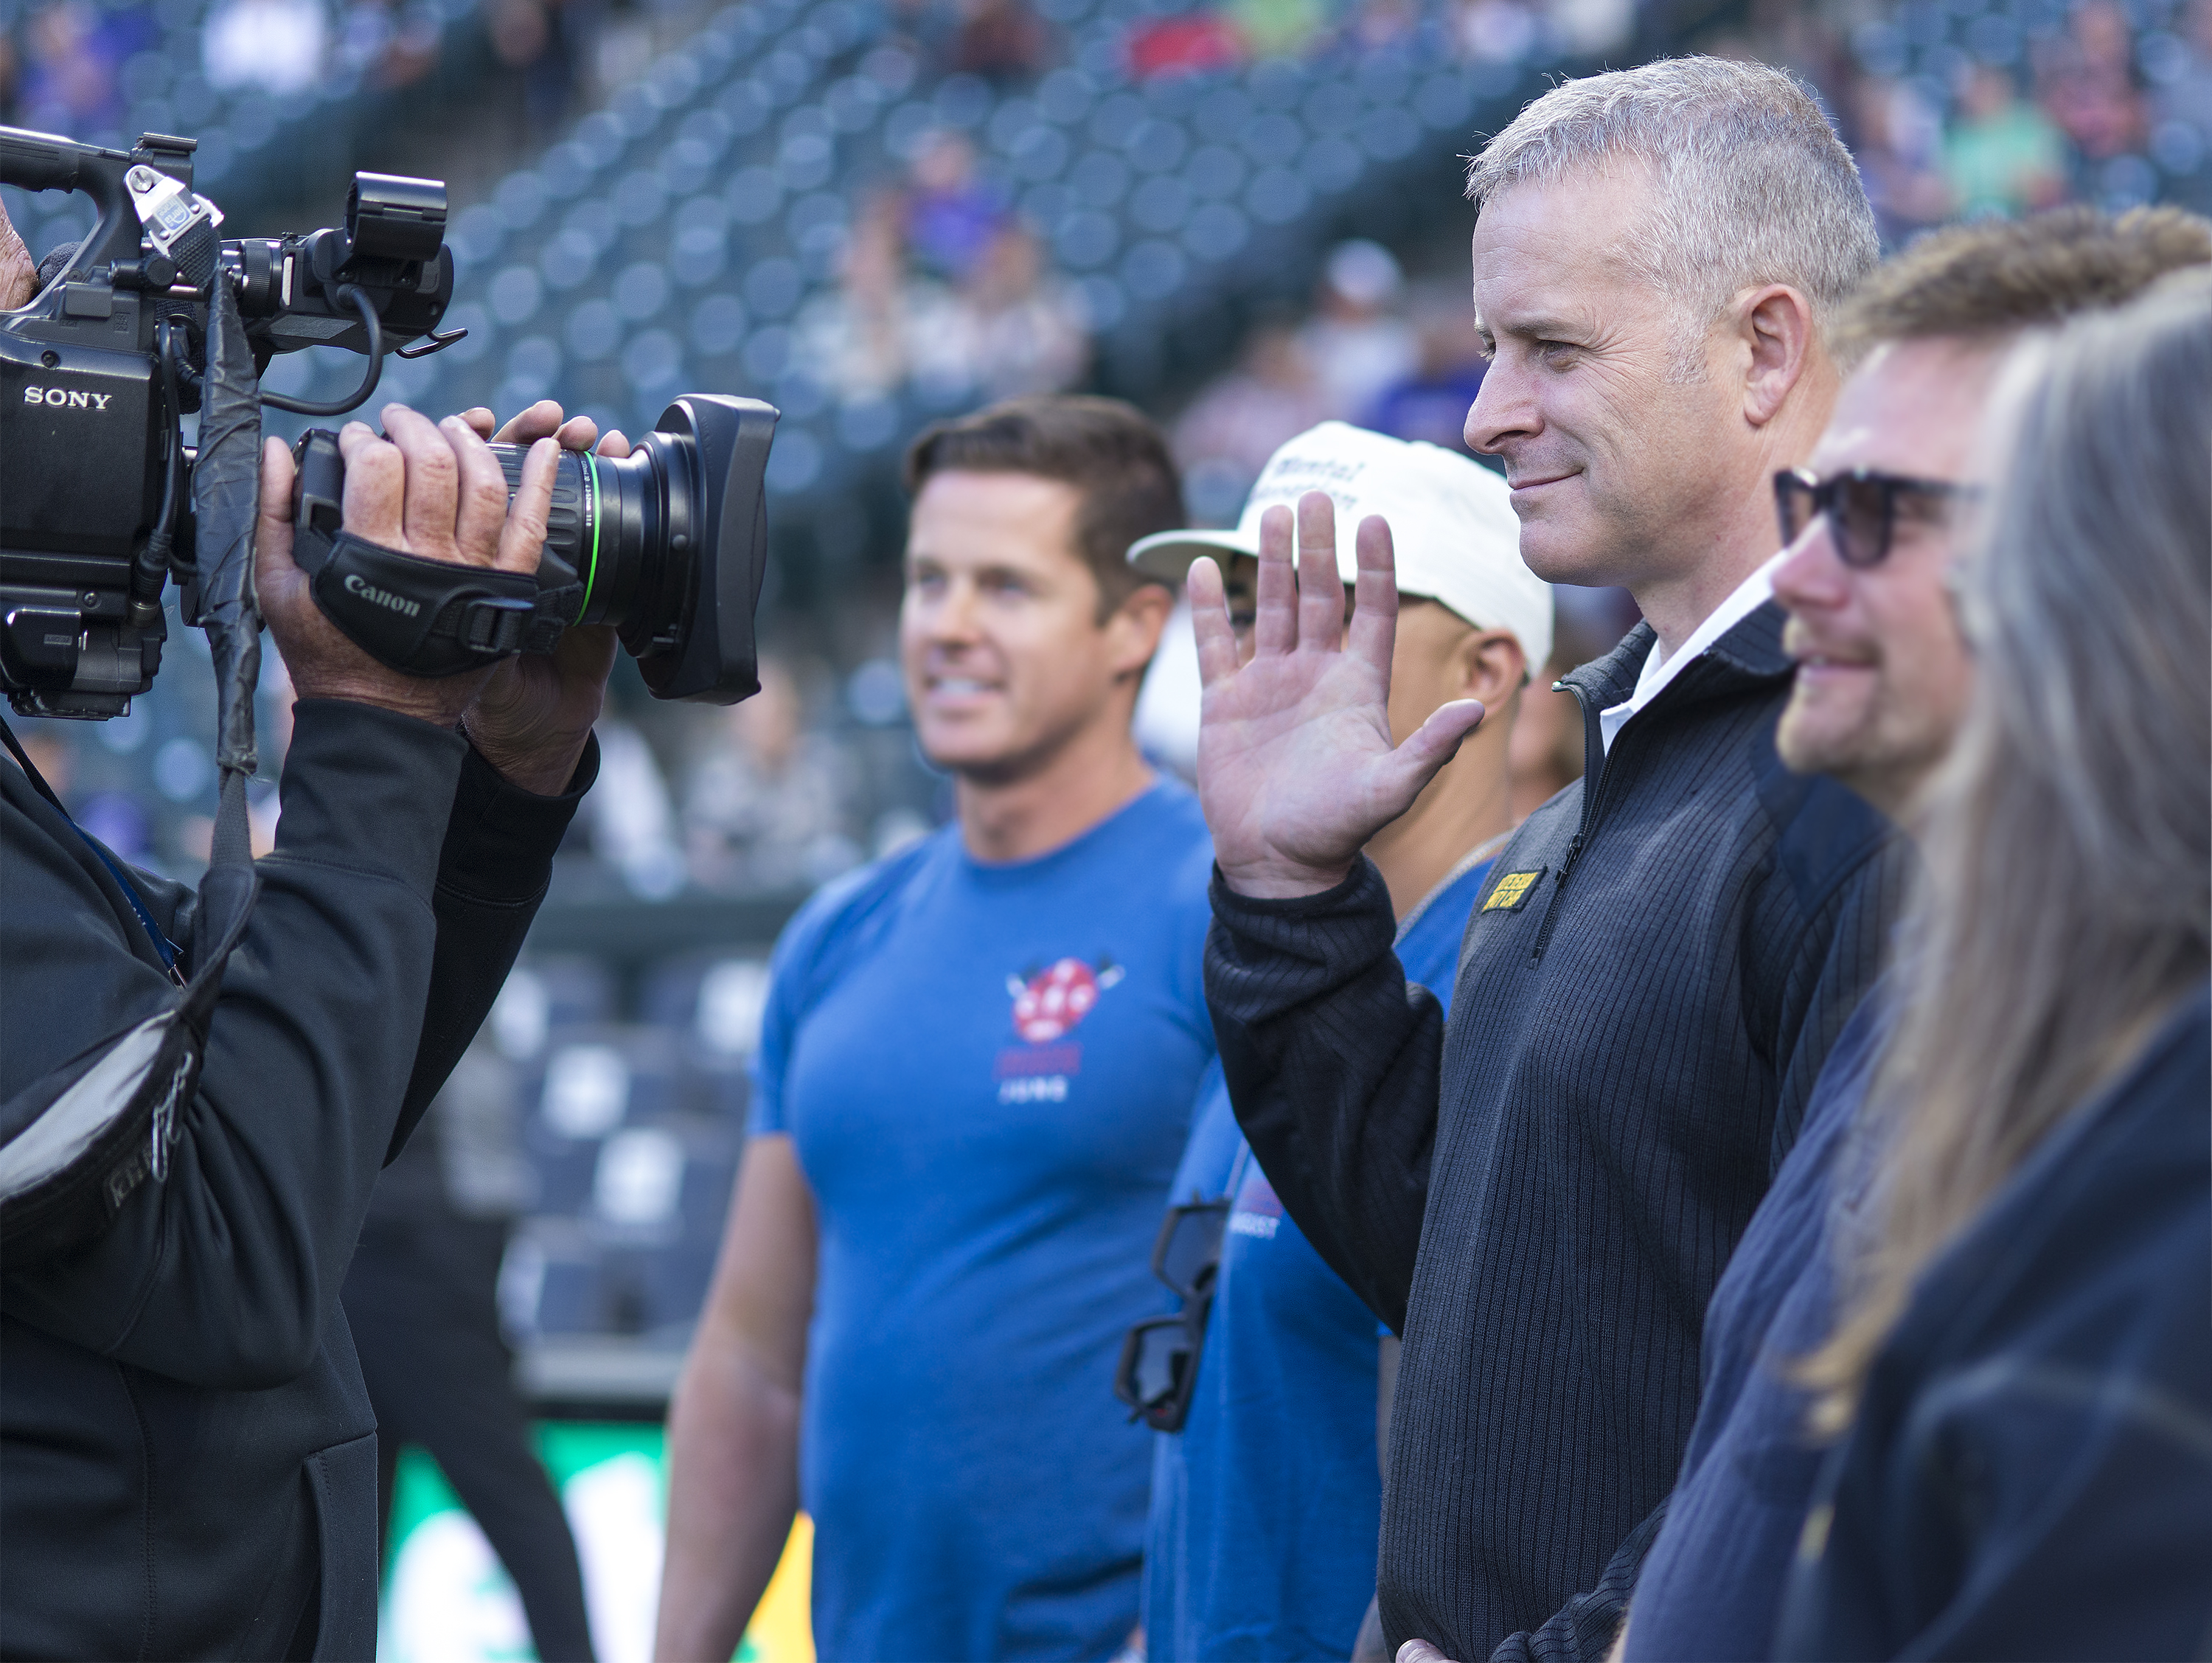 Denver Paramedic Division Deputy Chief Brent Stevenson waves to the crowd on the Coors field scoreboard.